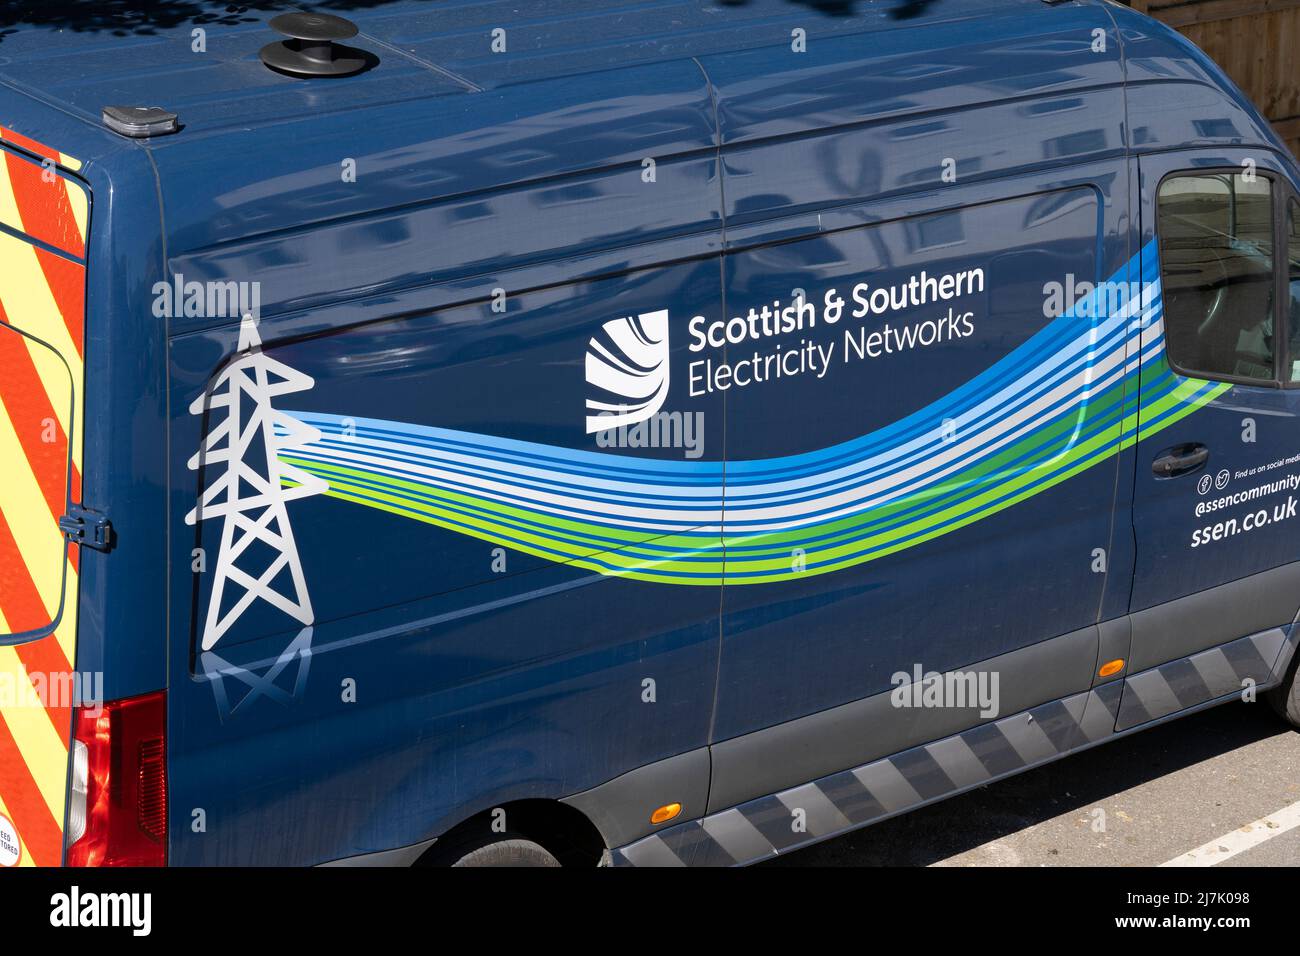 Scottish and Southern Electricity Networks (SSE) maintenance vehicle parked at a property for an electrical engineer to diagnose & fix a fault. UK Stock Photo